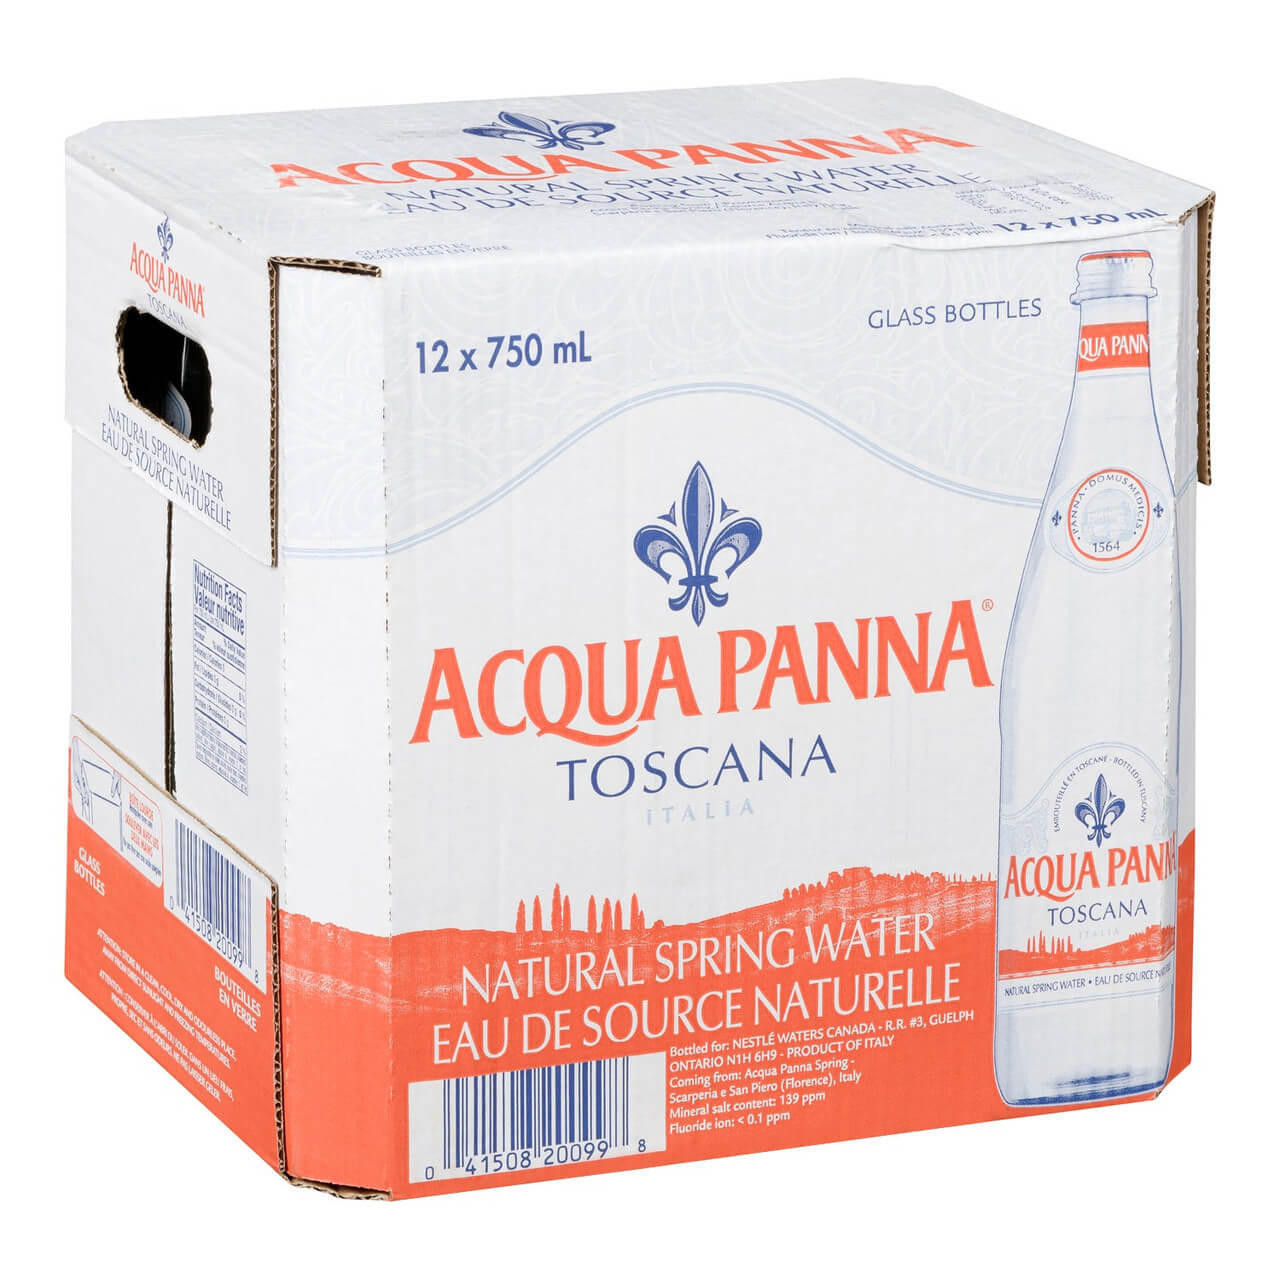 NESTLE CANADA INC Acqua Panna Natural Spring Water, Glass | 750ML |12/Case | Pallet Of 64 Cases 